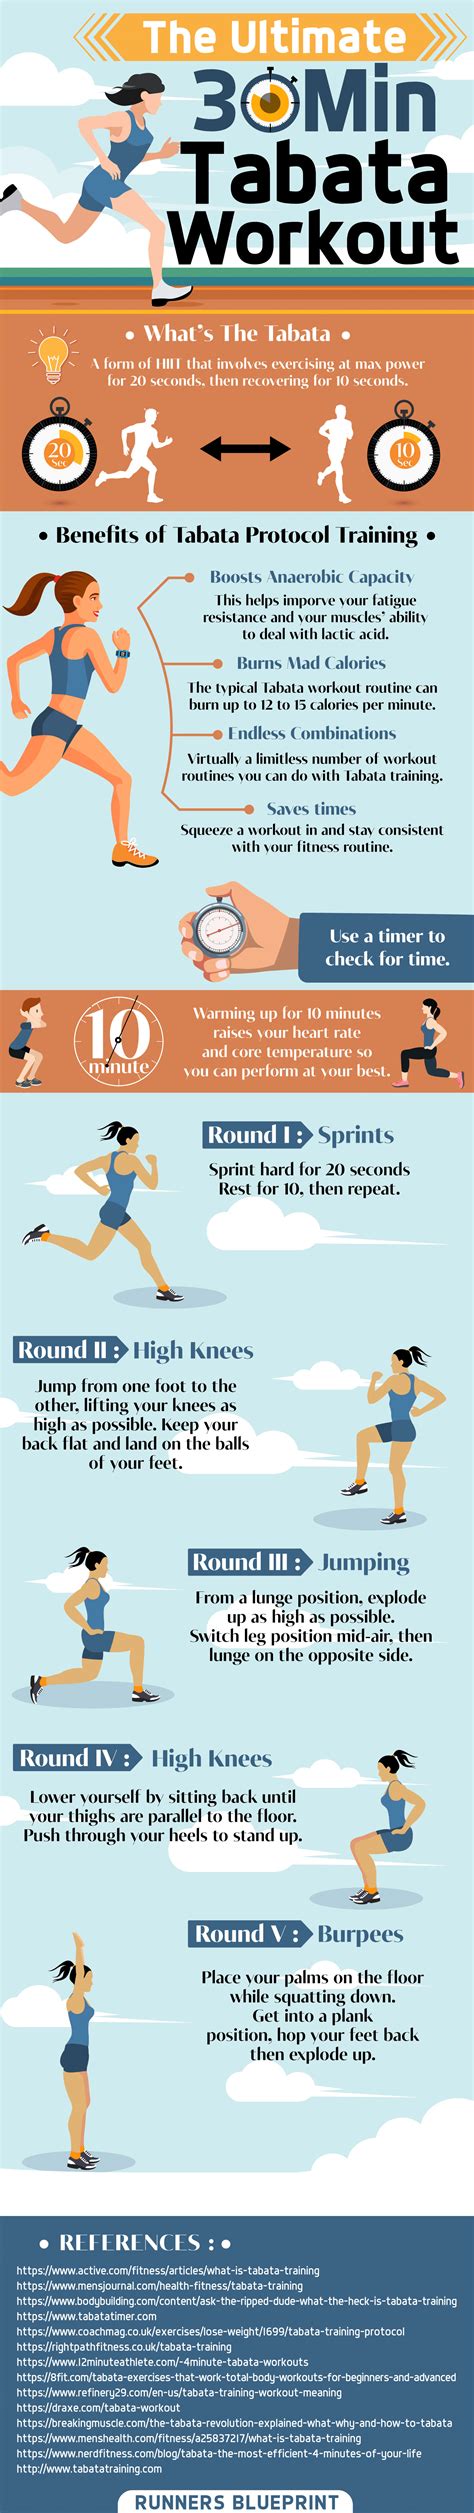 The Ultimate Minute Tabata Workout Infographic Runners Blueprint